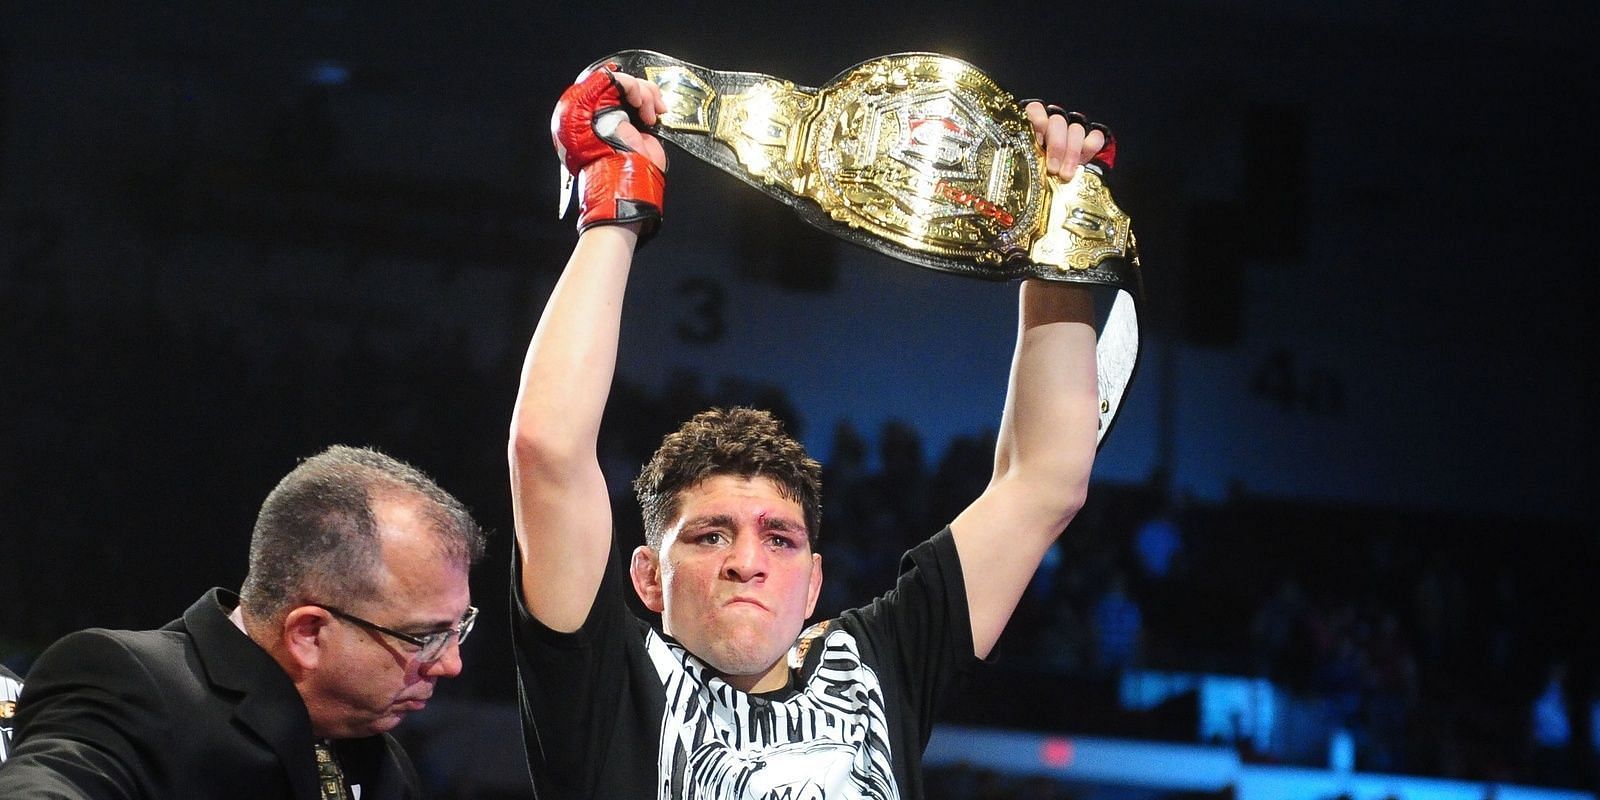 Nick Diaz&#039;s run in StrikeForce turned him into the superstar he is today